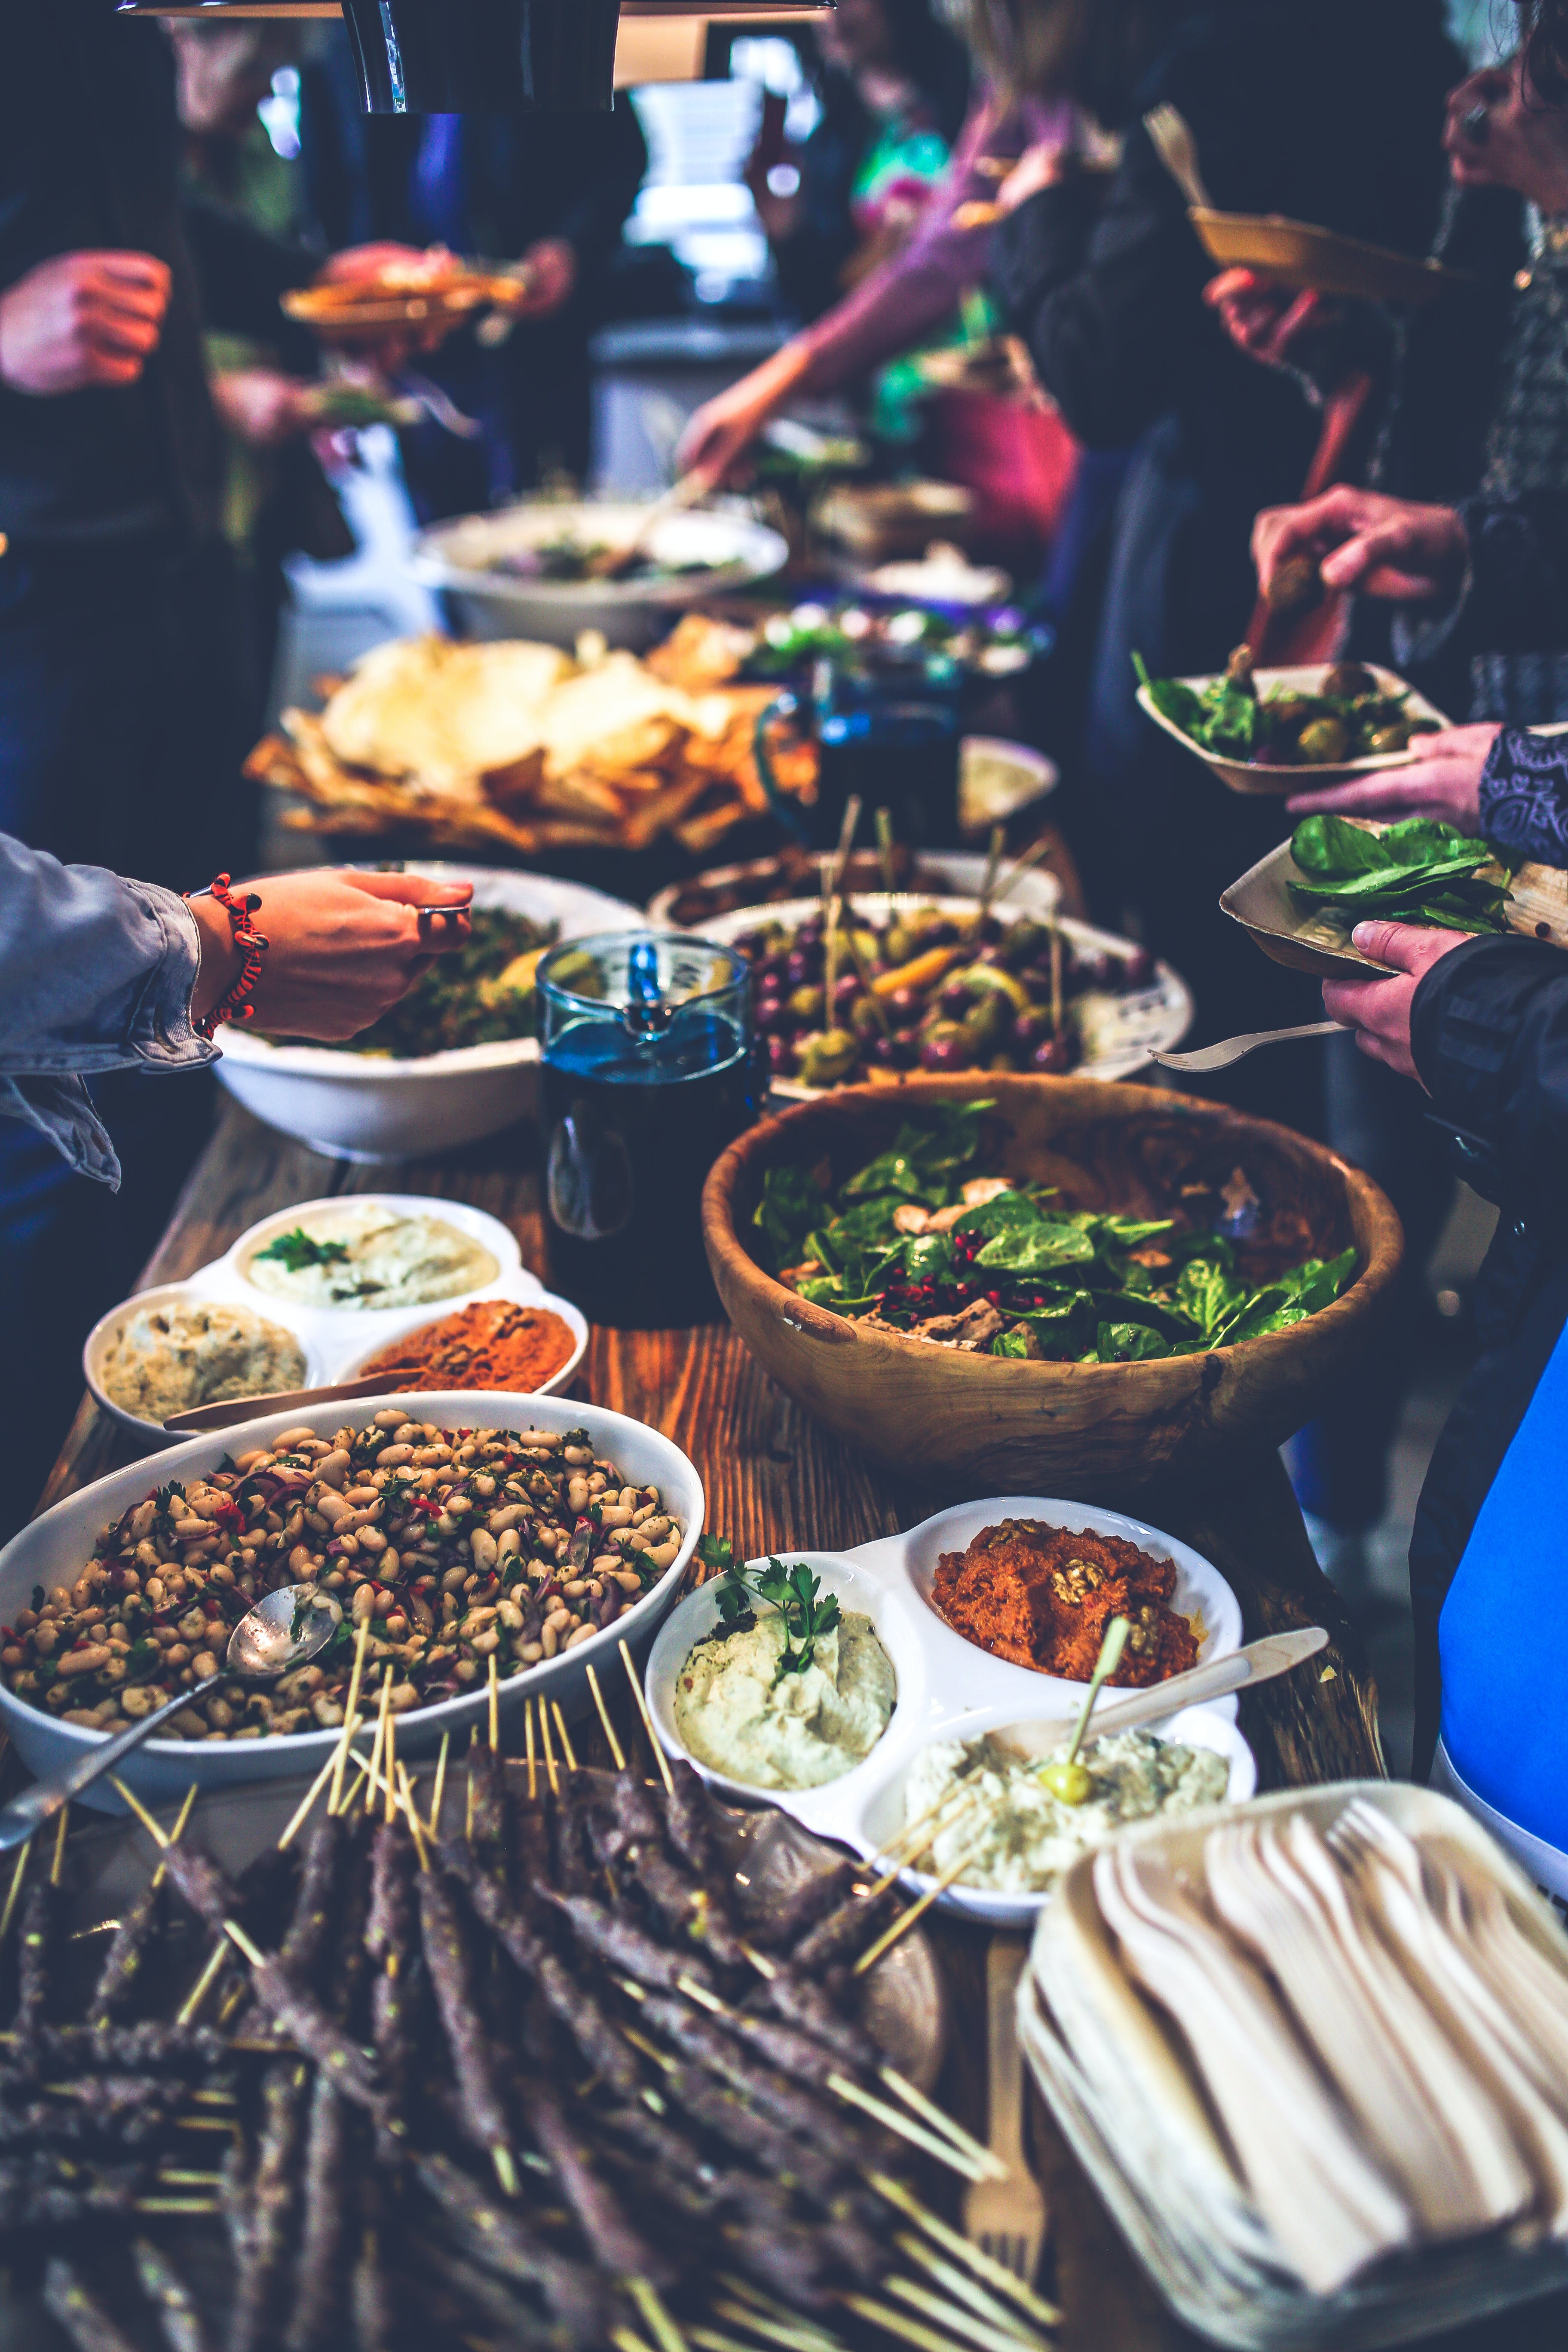 People dishing up from a buffet | Source: Pexels